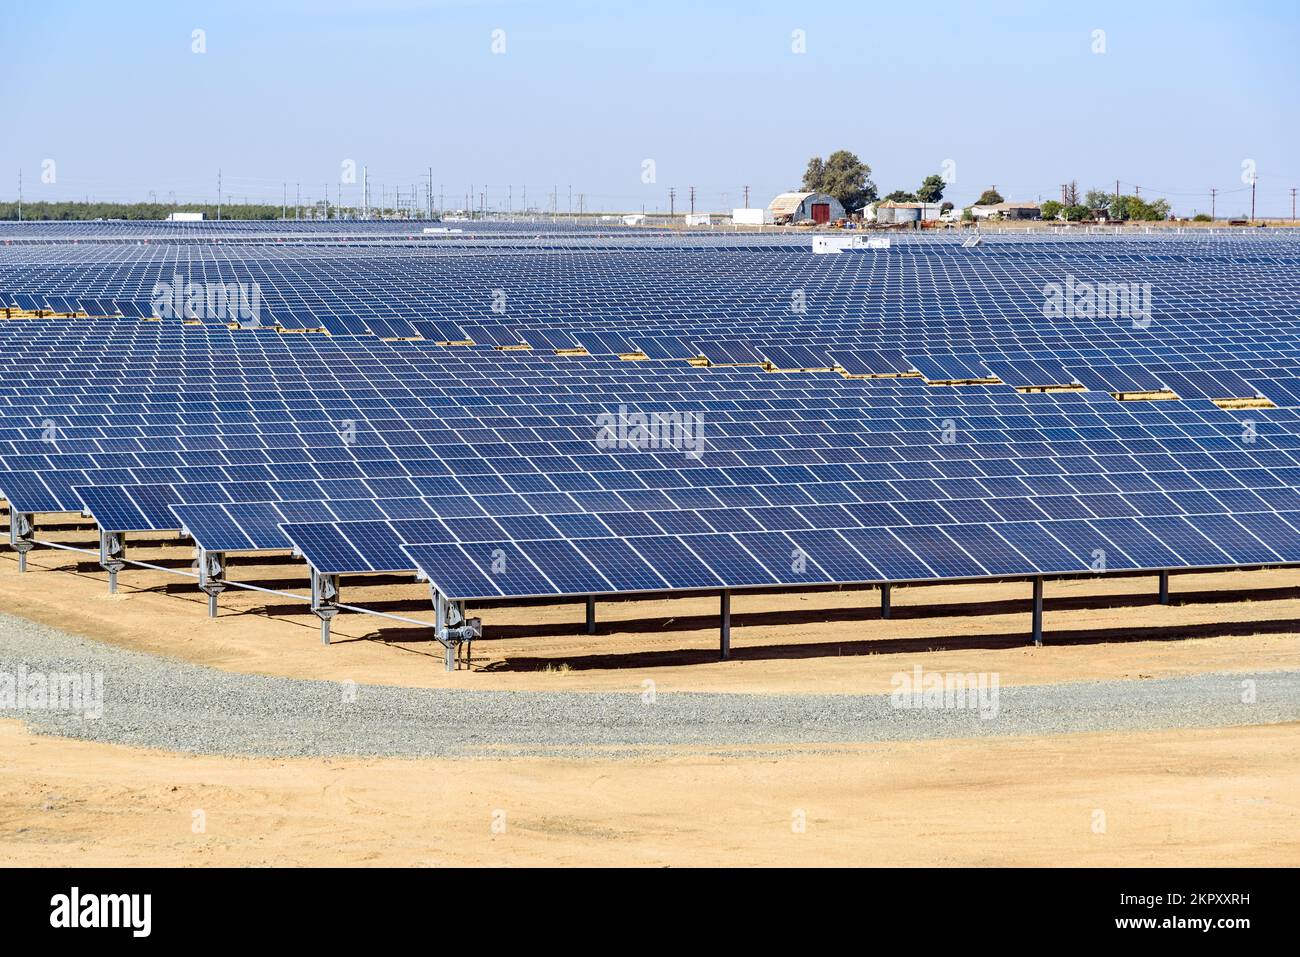 Rows of salr panels in the countryside of California on a sunny autumn day Stock Photo